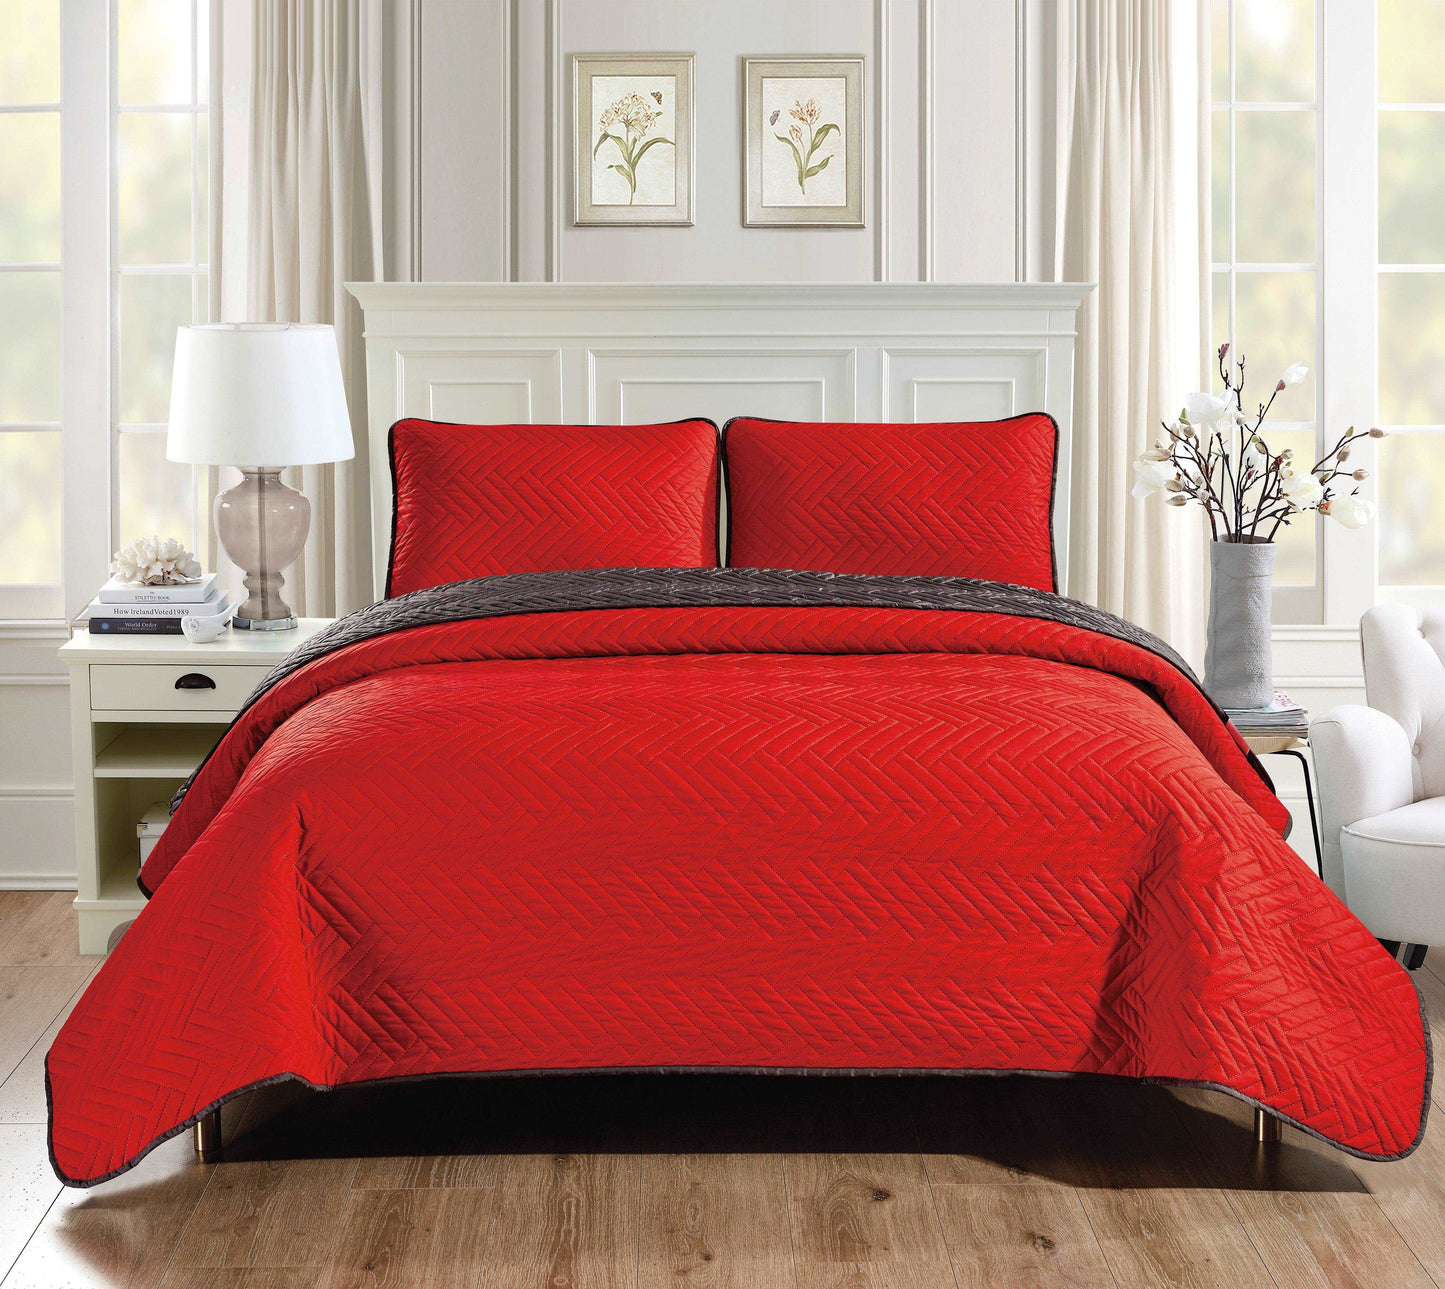 Linen World Red/Gray / King “Sutton” 3 piece reversible quilt set with 2 shams